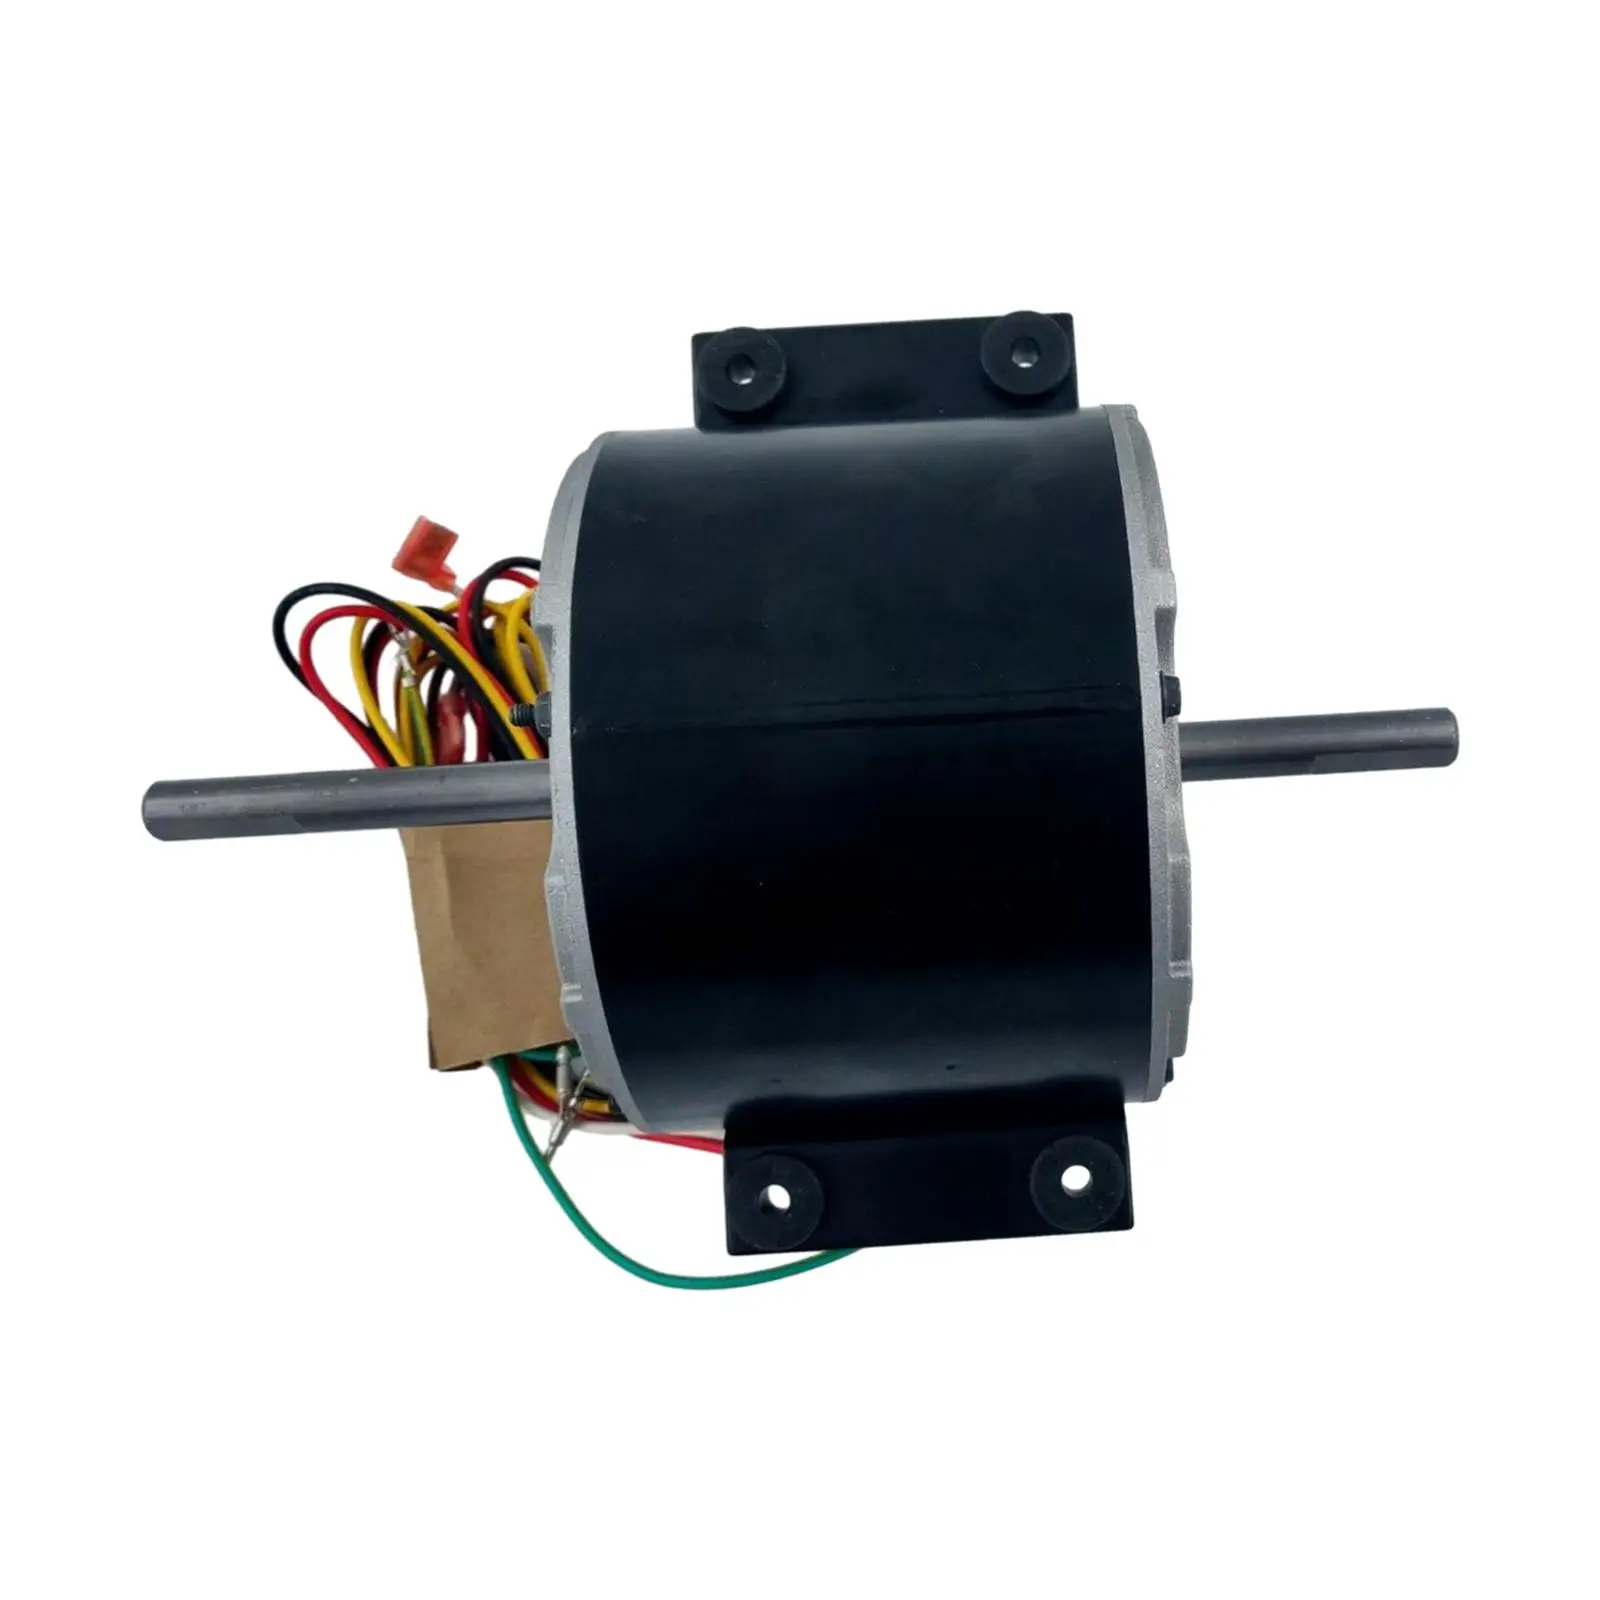 Condenser Fan Motor 3315332.005 3 Speed Aluminum Alloy Replace for Brisk Air II